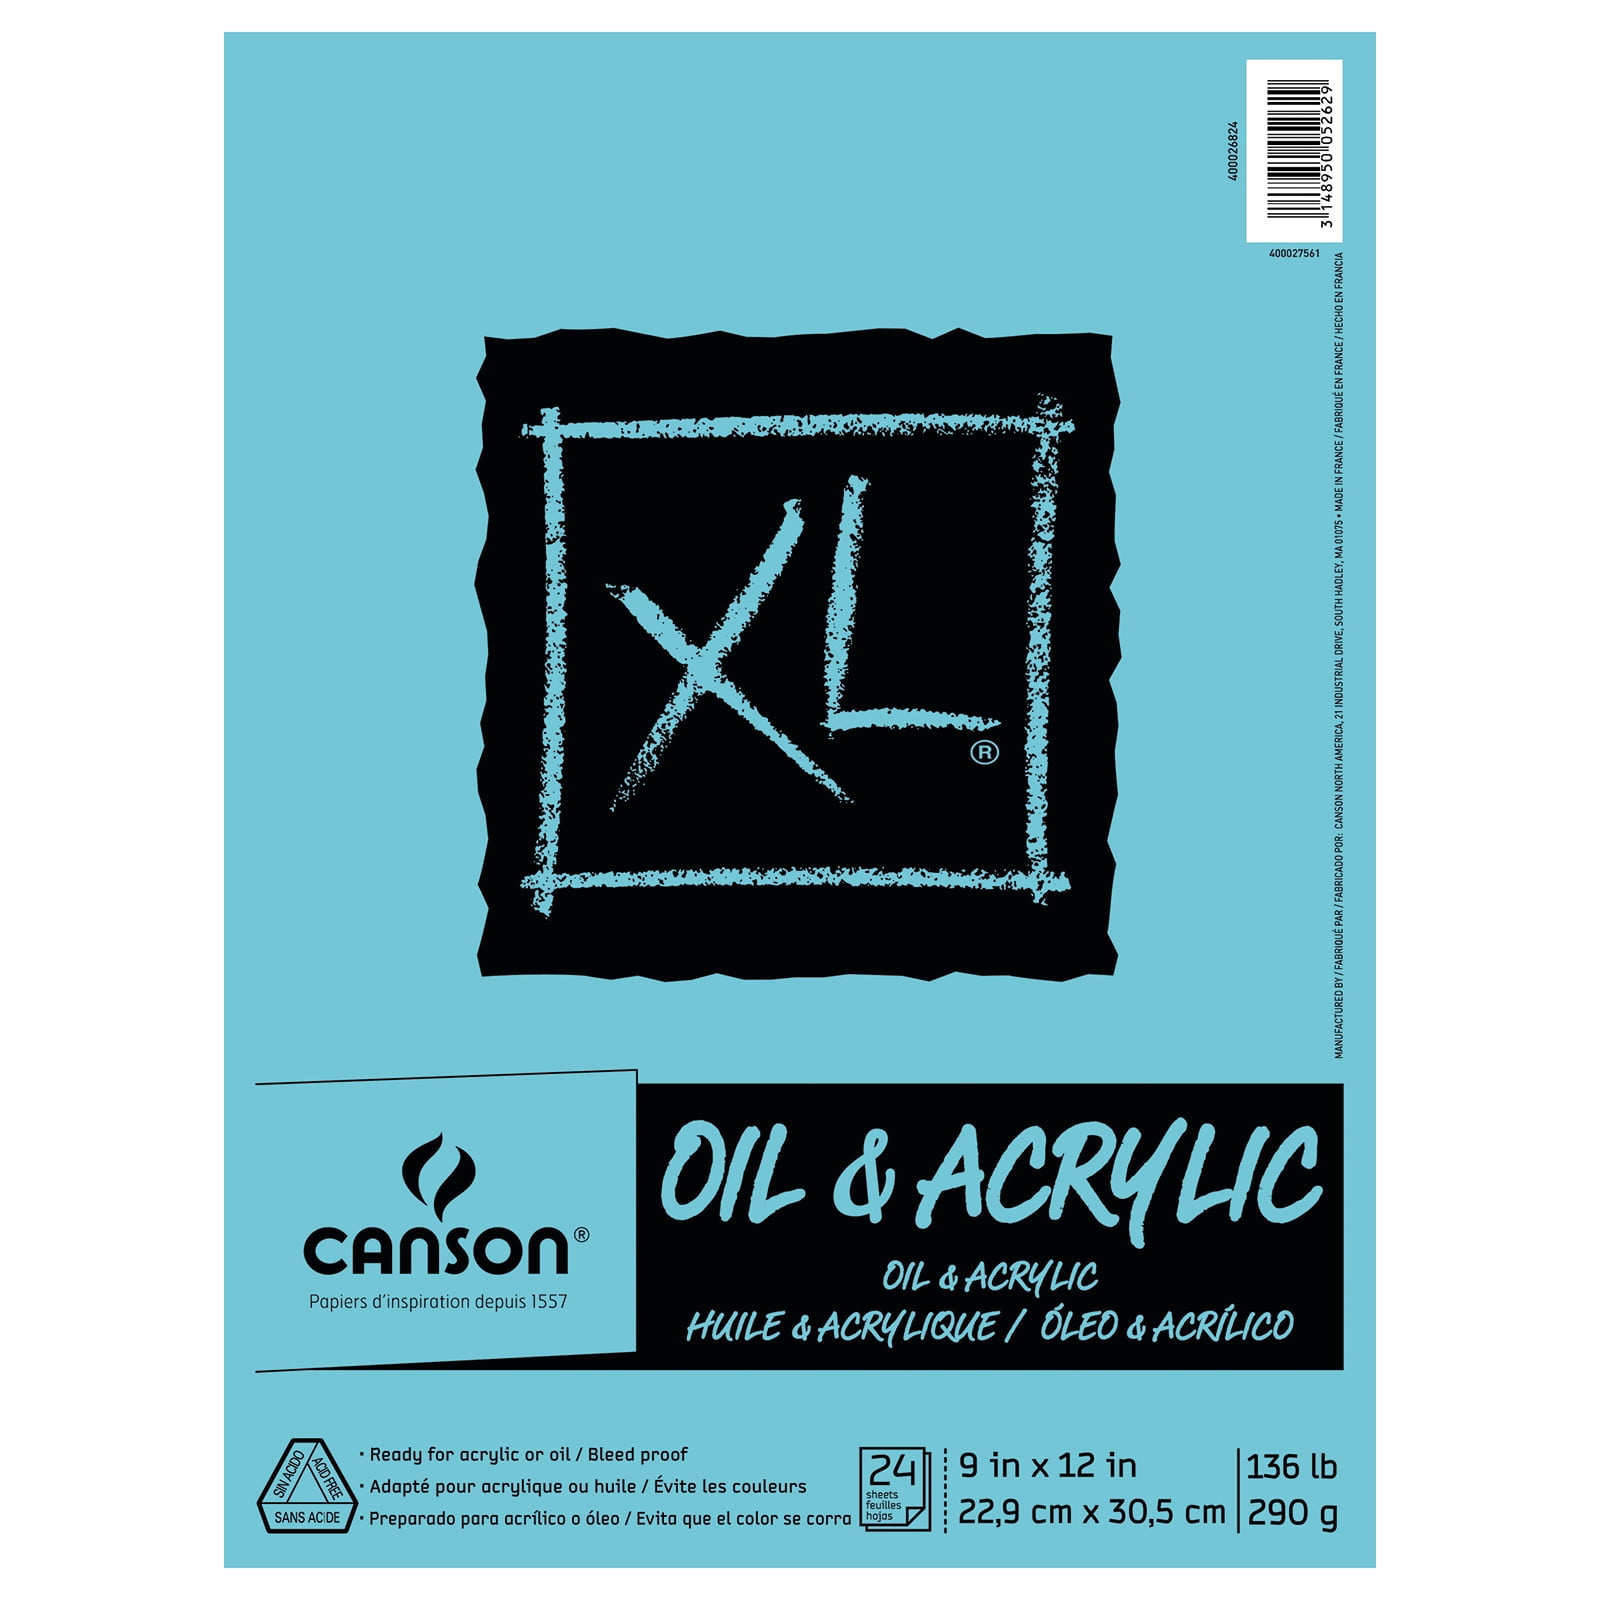 Canson Artist Series Canva-Paper, Roll, 48inx5yd (136lb/290g) - Artist  Paper for Adults and Students - Oil Paint, Acrylic Paint, Mixed Media